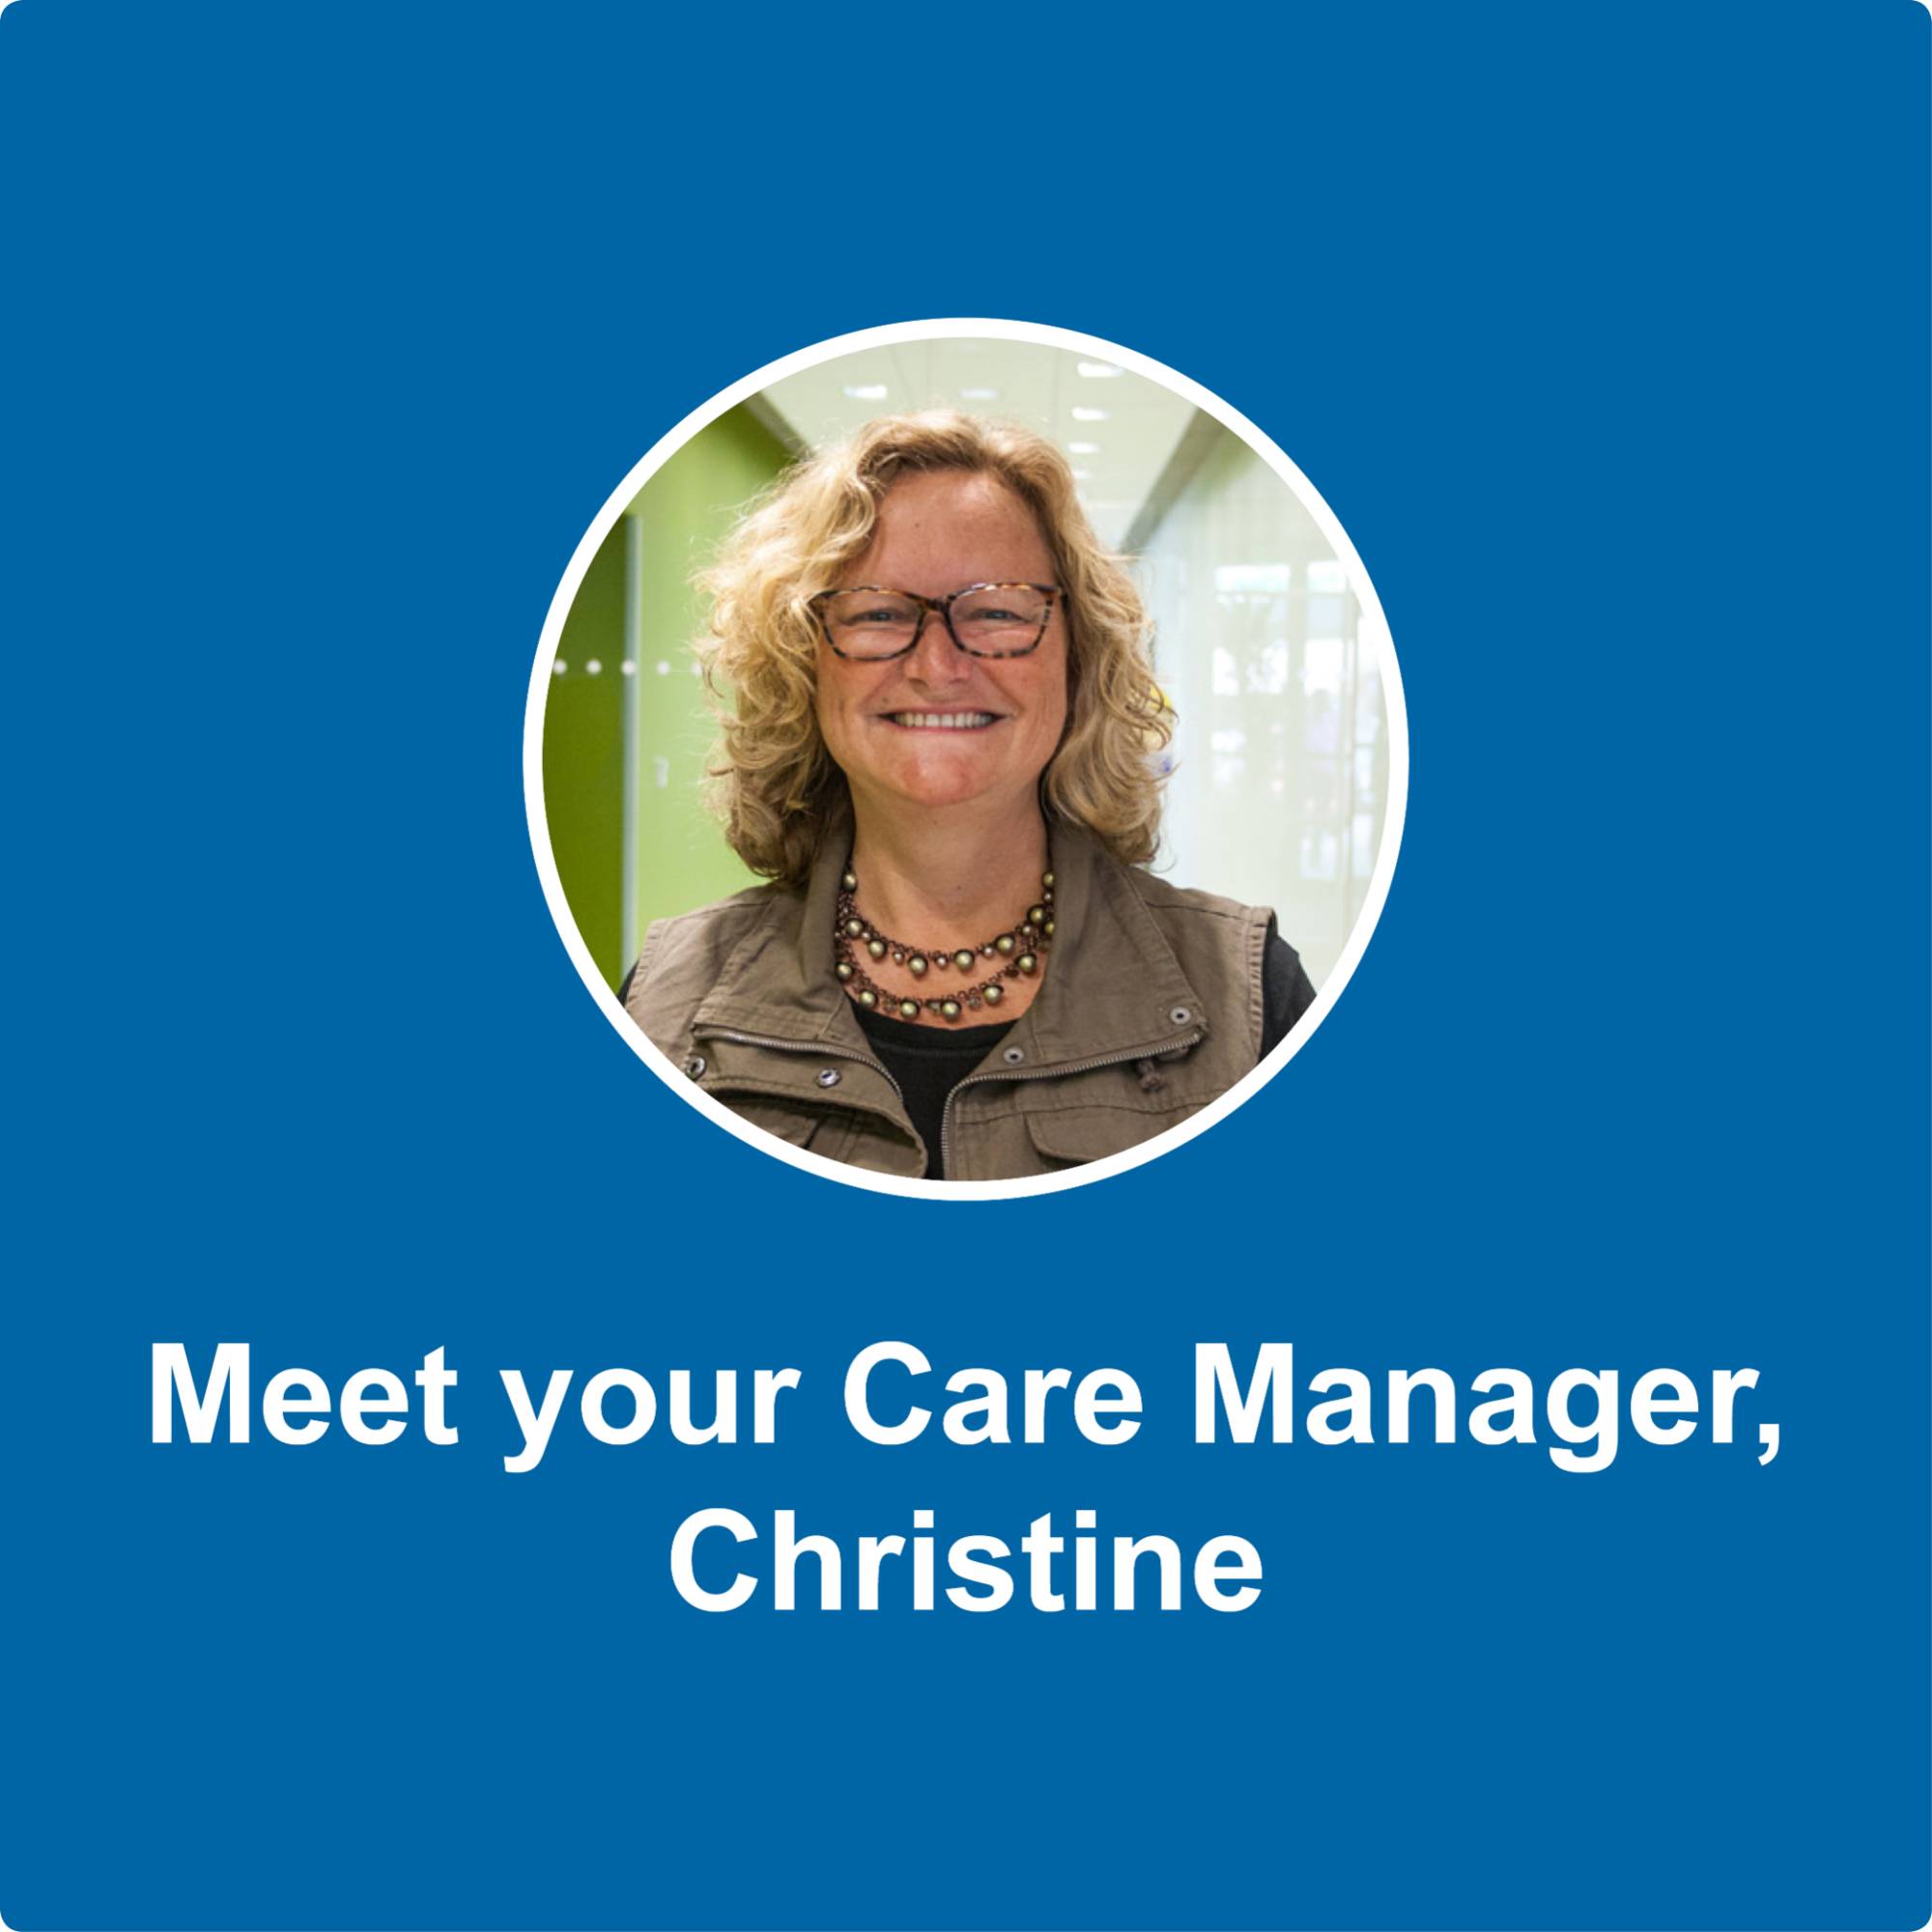 Meet your Care Manager from Priority Health, Christine